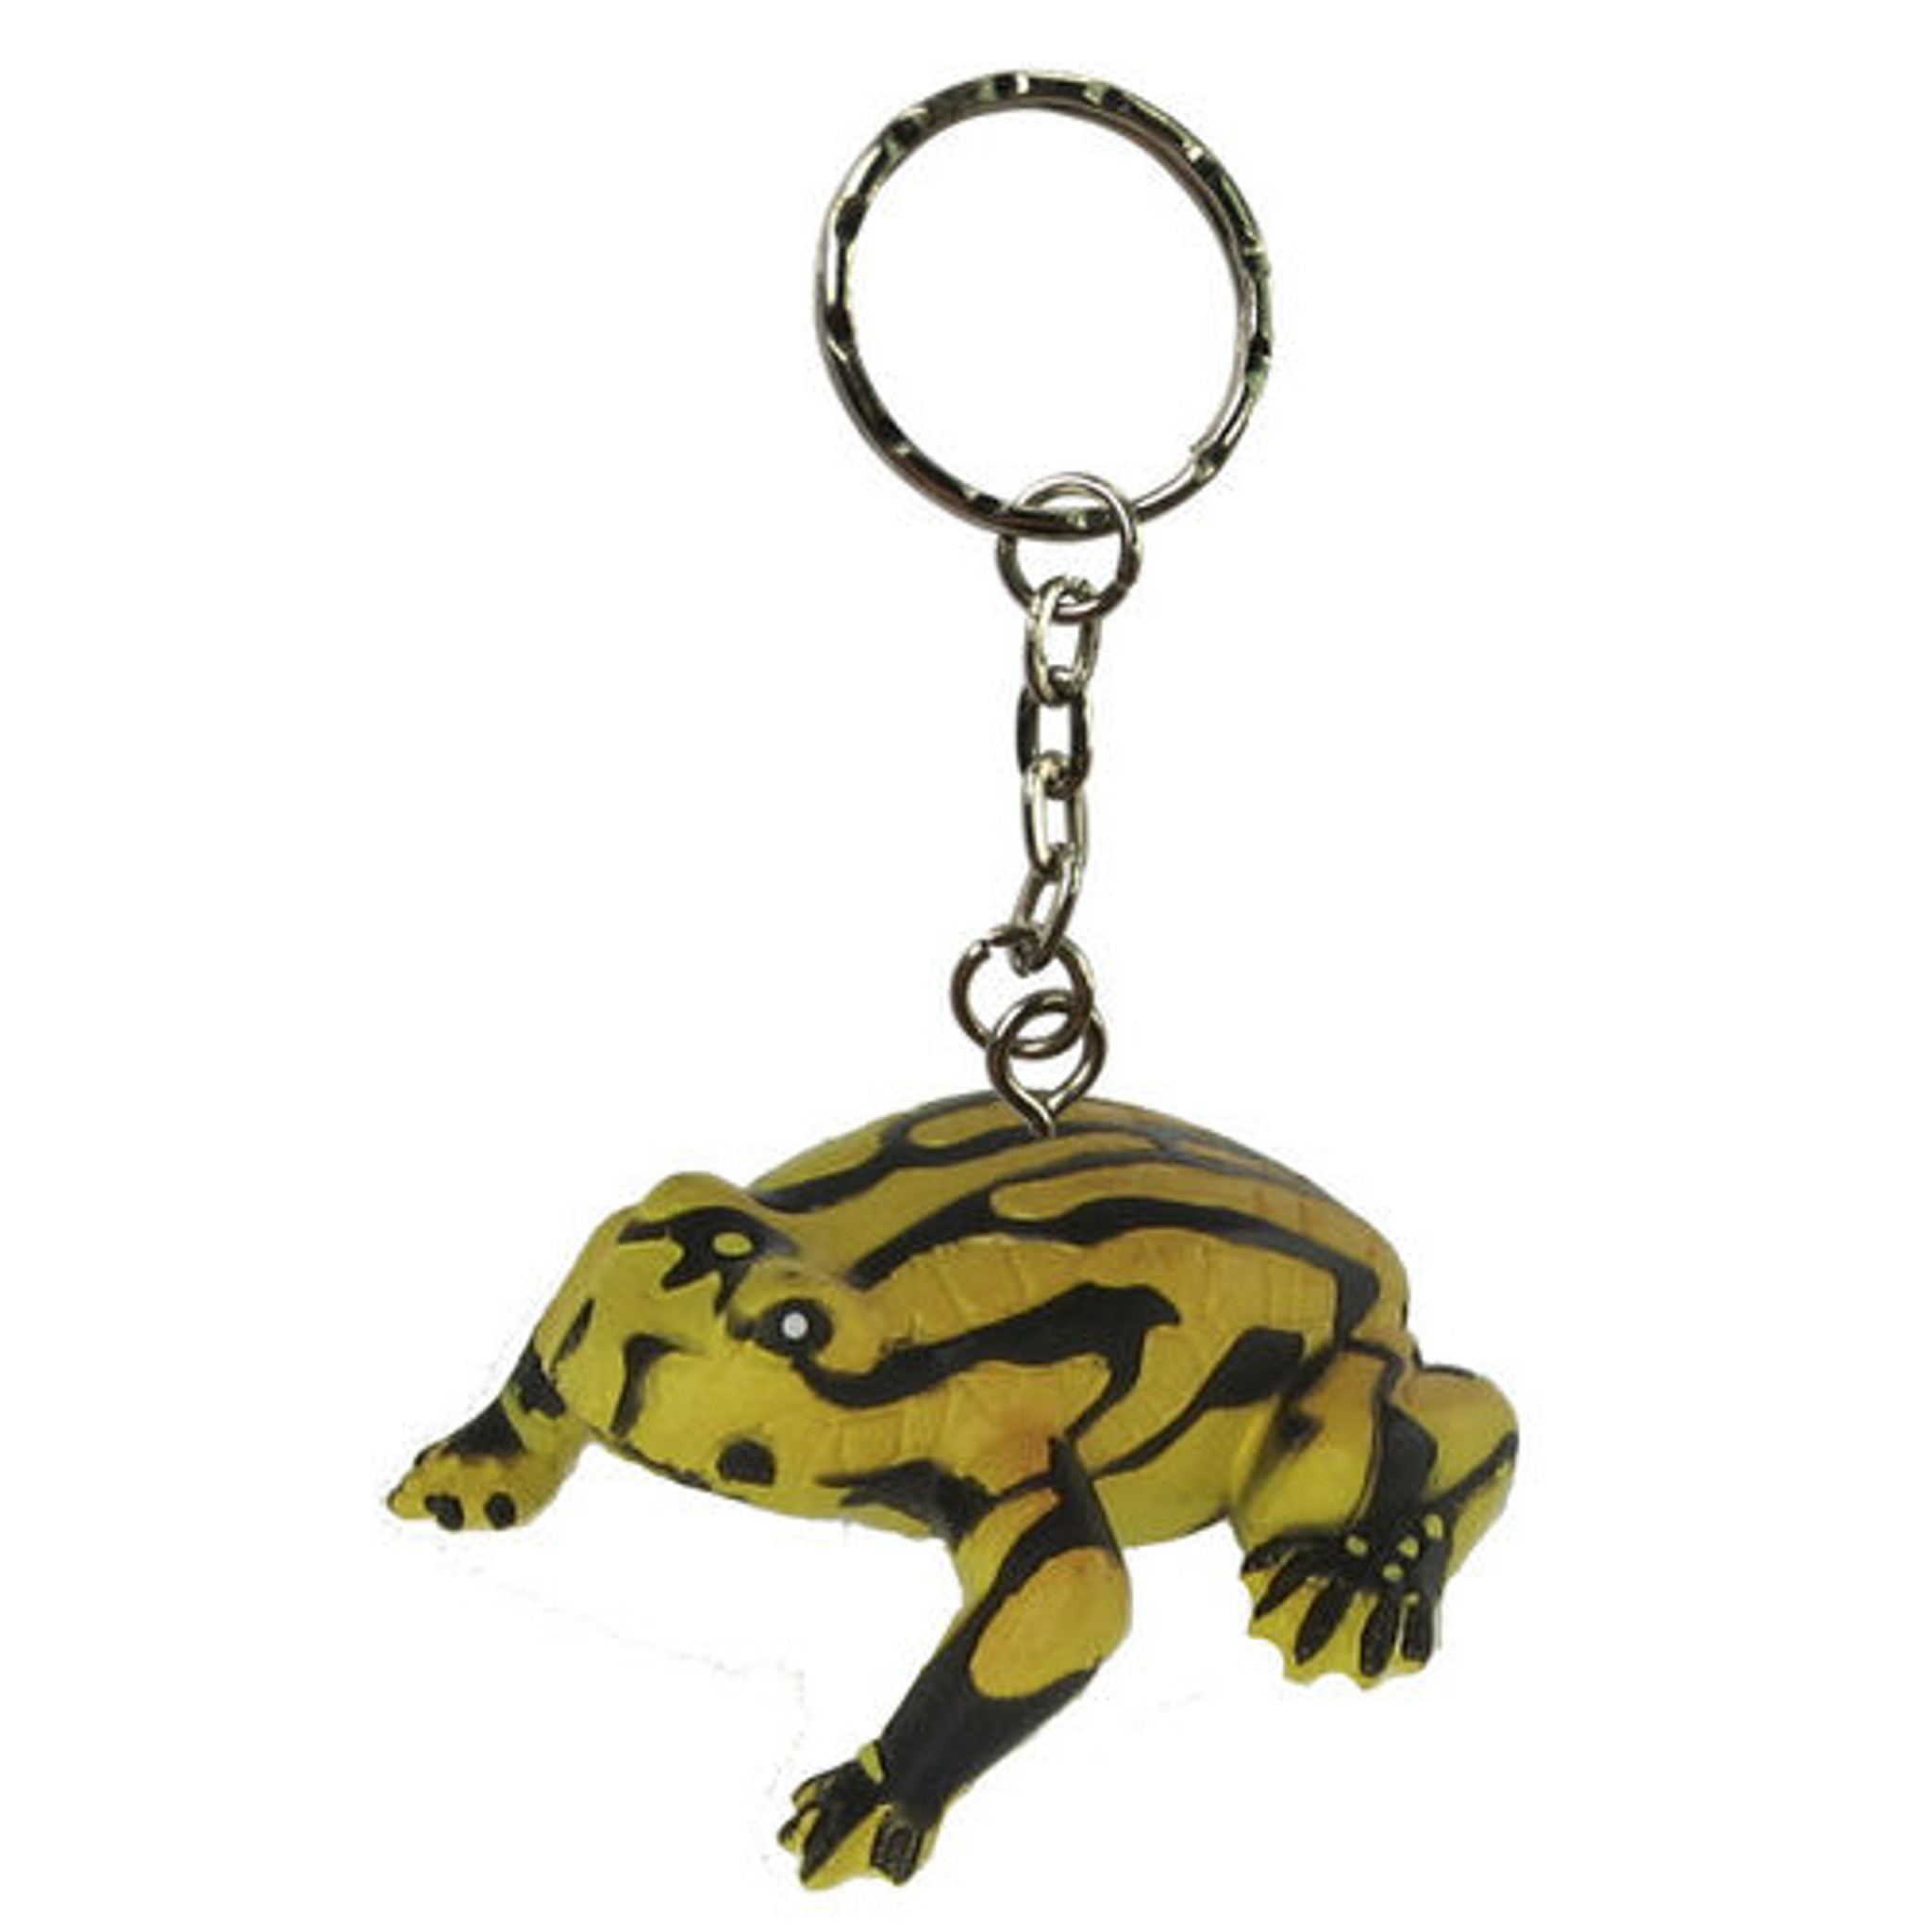 https://cdn11.bigcommerce.com/s-qnjeuni46r/images/stencil/2048x2048/products/9040/23515/Science_and_Nature_Corroboree_Frog_Keychain_75366__34368.1548381892.jpg?c=2